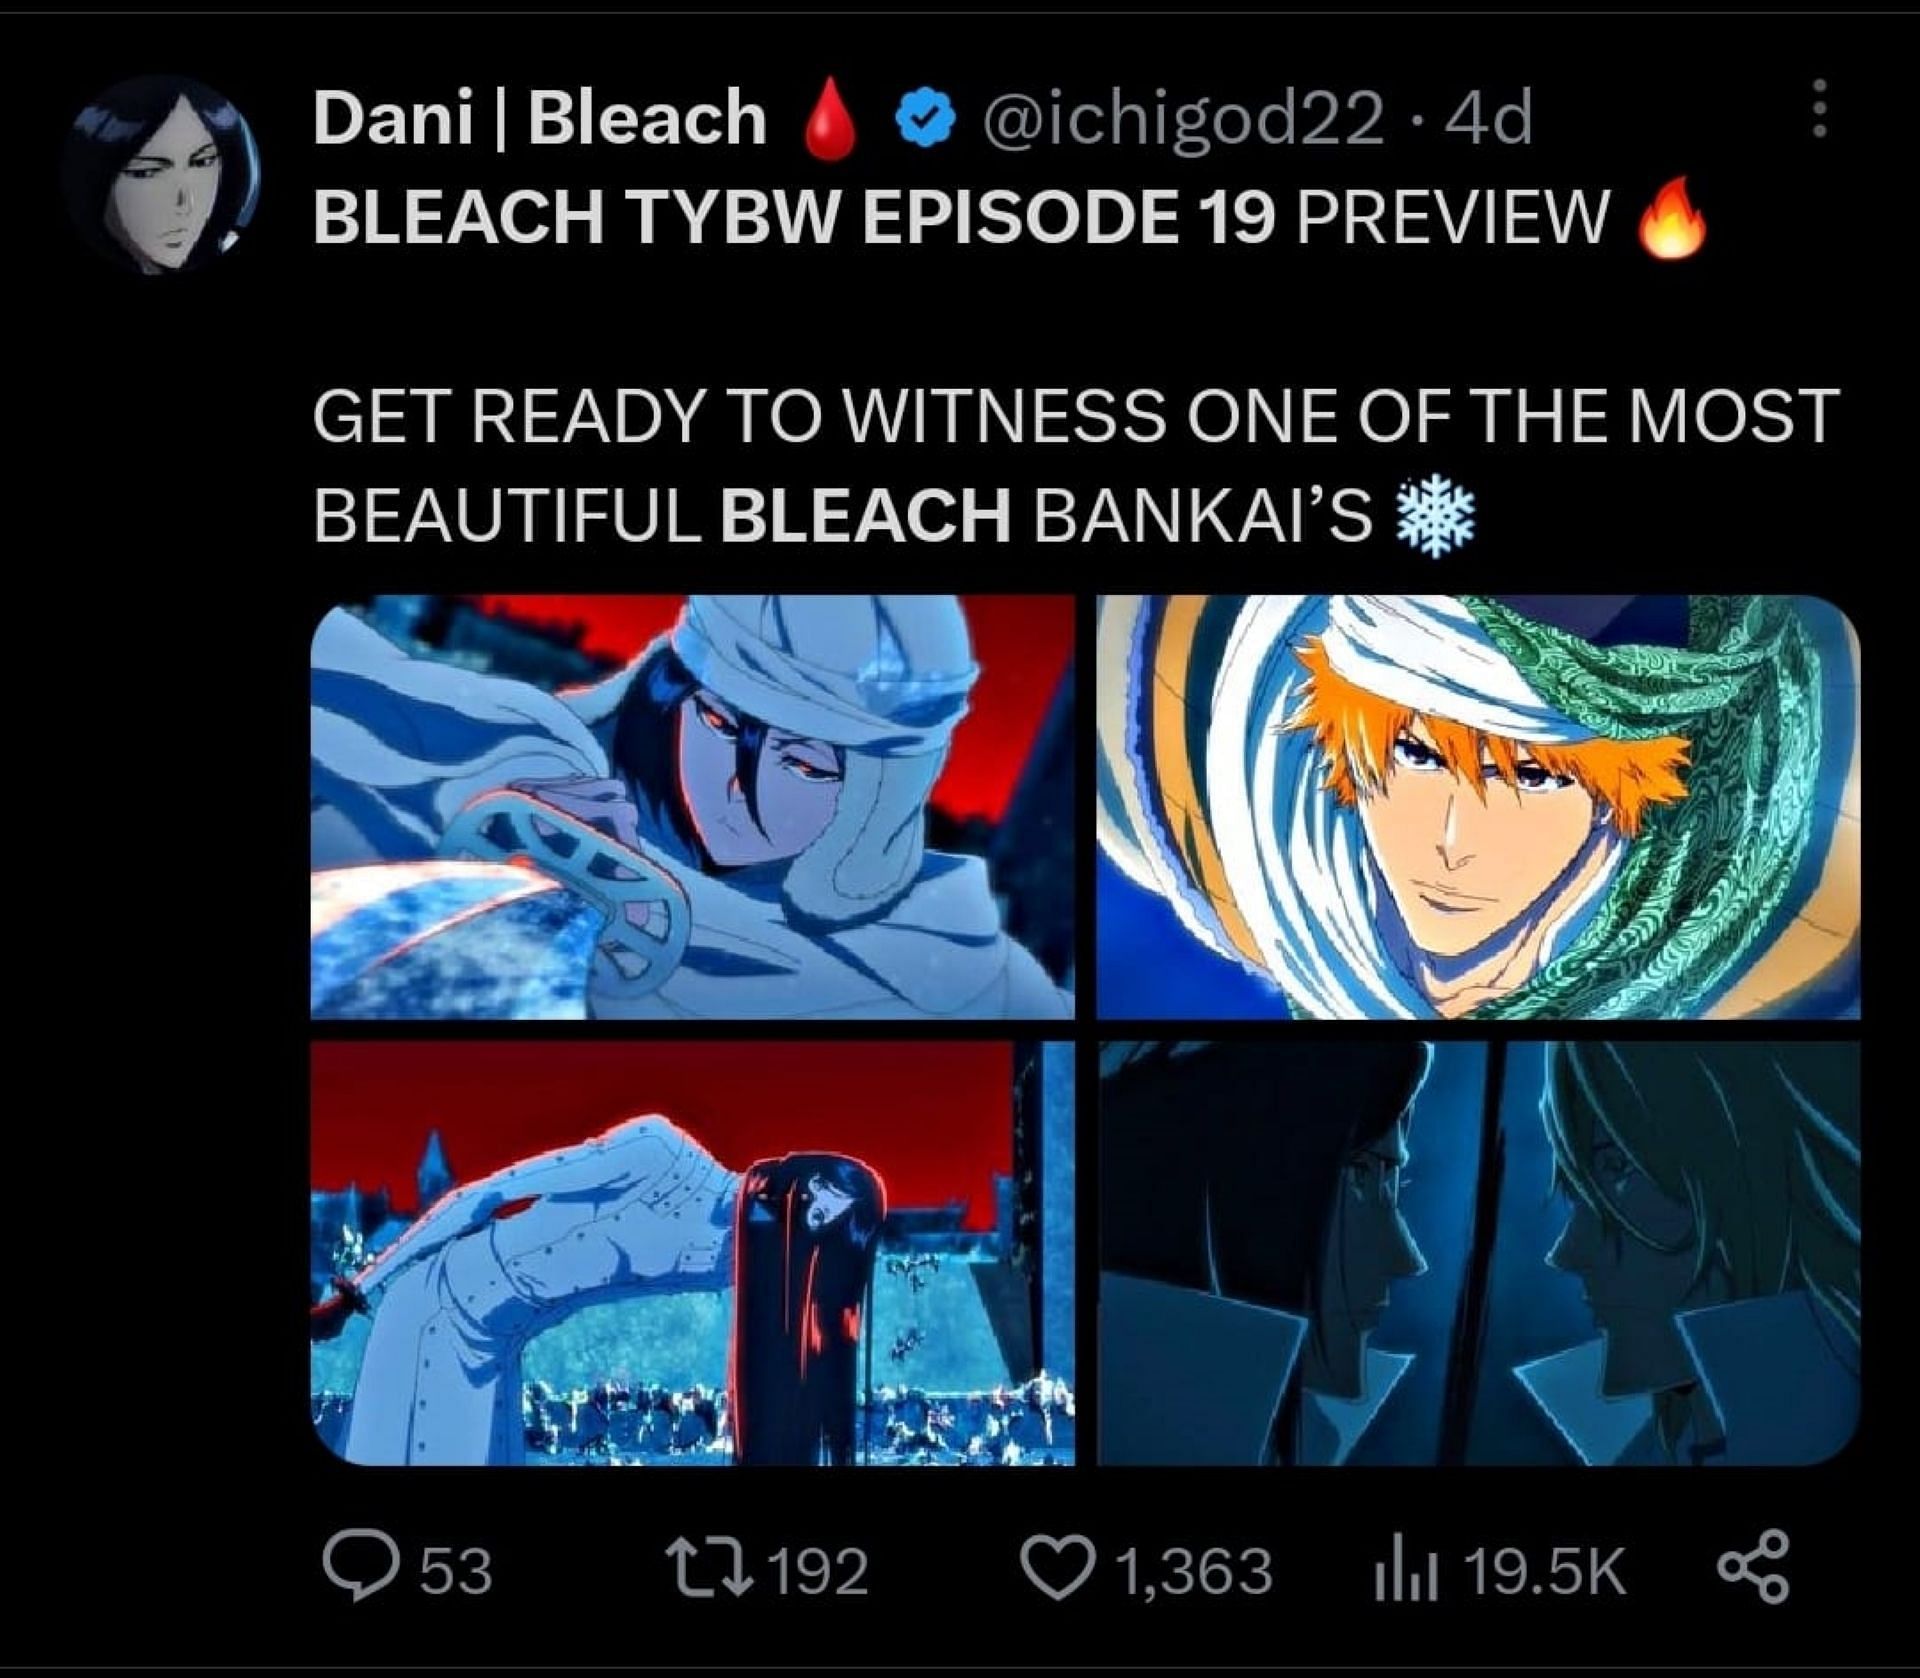 Bleach TYBW Cour 2 Ep 12 (25) The Master - preview images, plot summary &  staff list : r/bleach